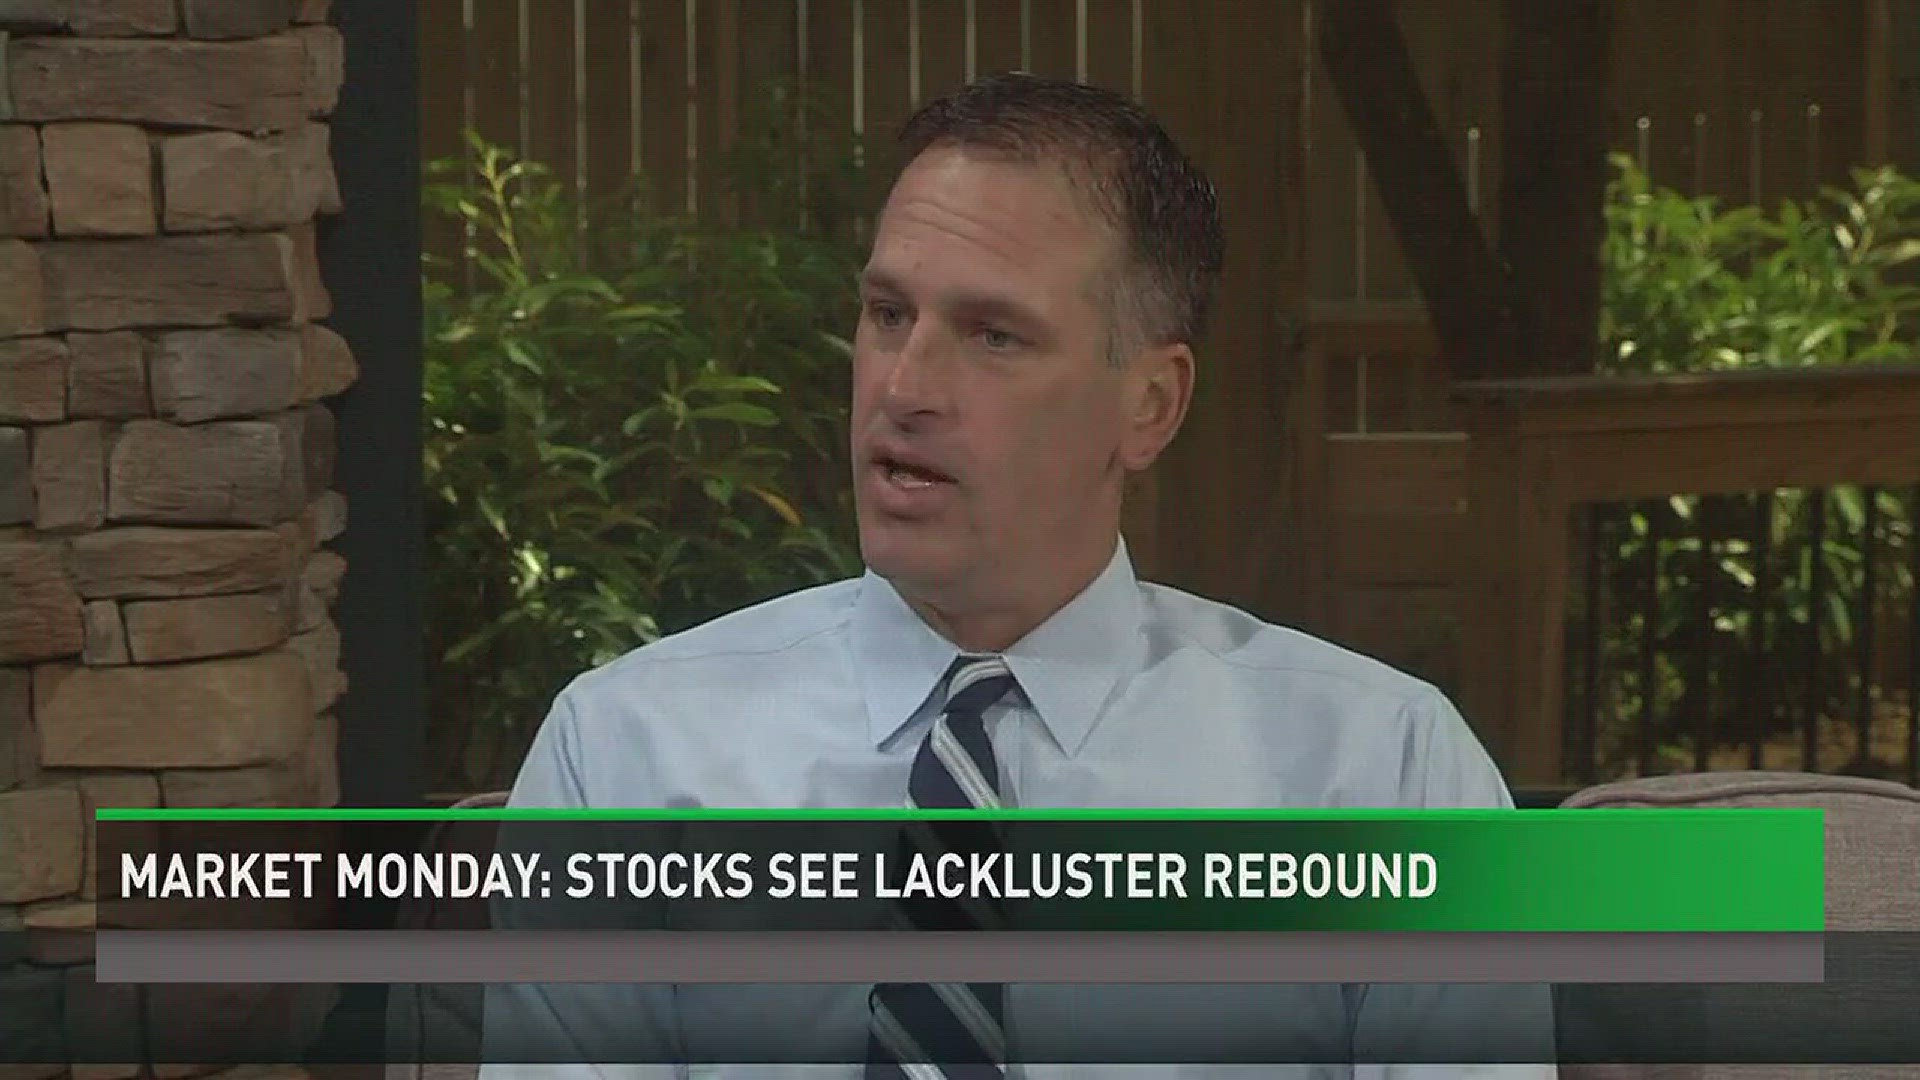 Eric Foster from Waltman Capital discusses how stocks performed in the second quarter.